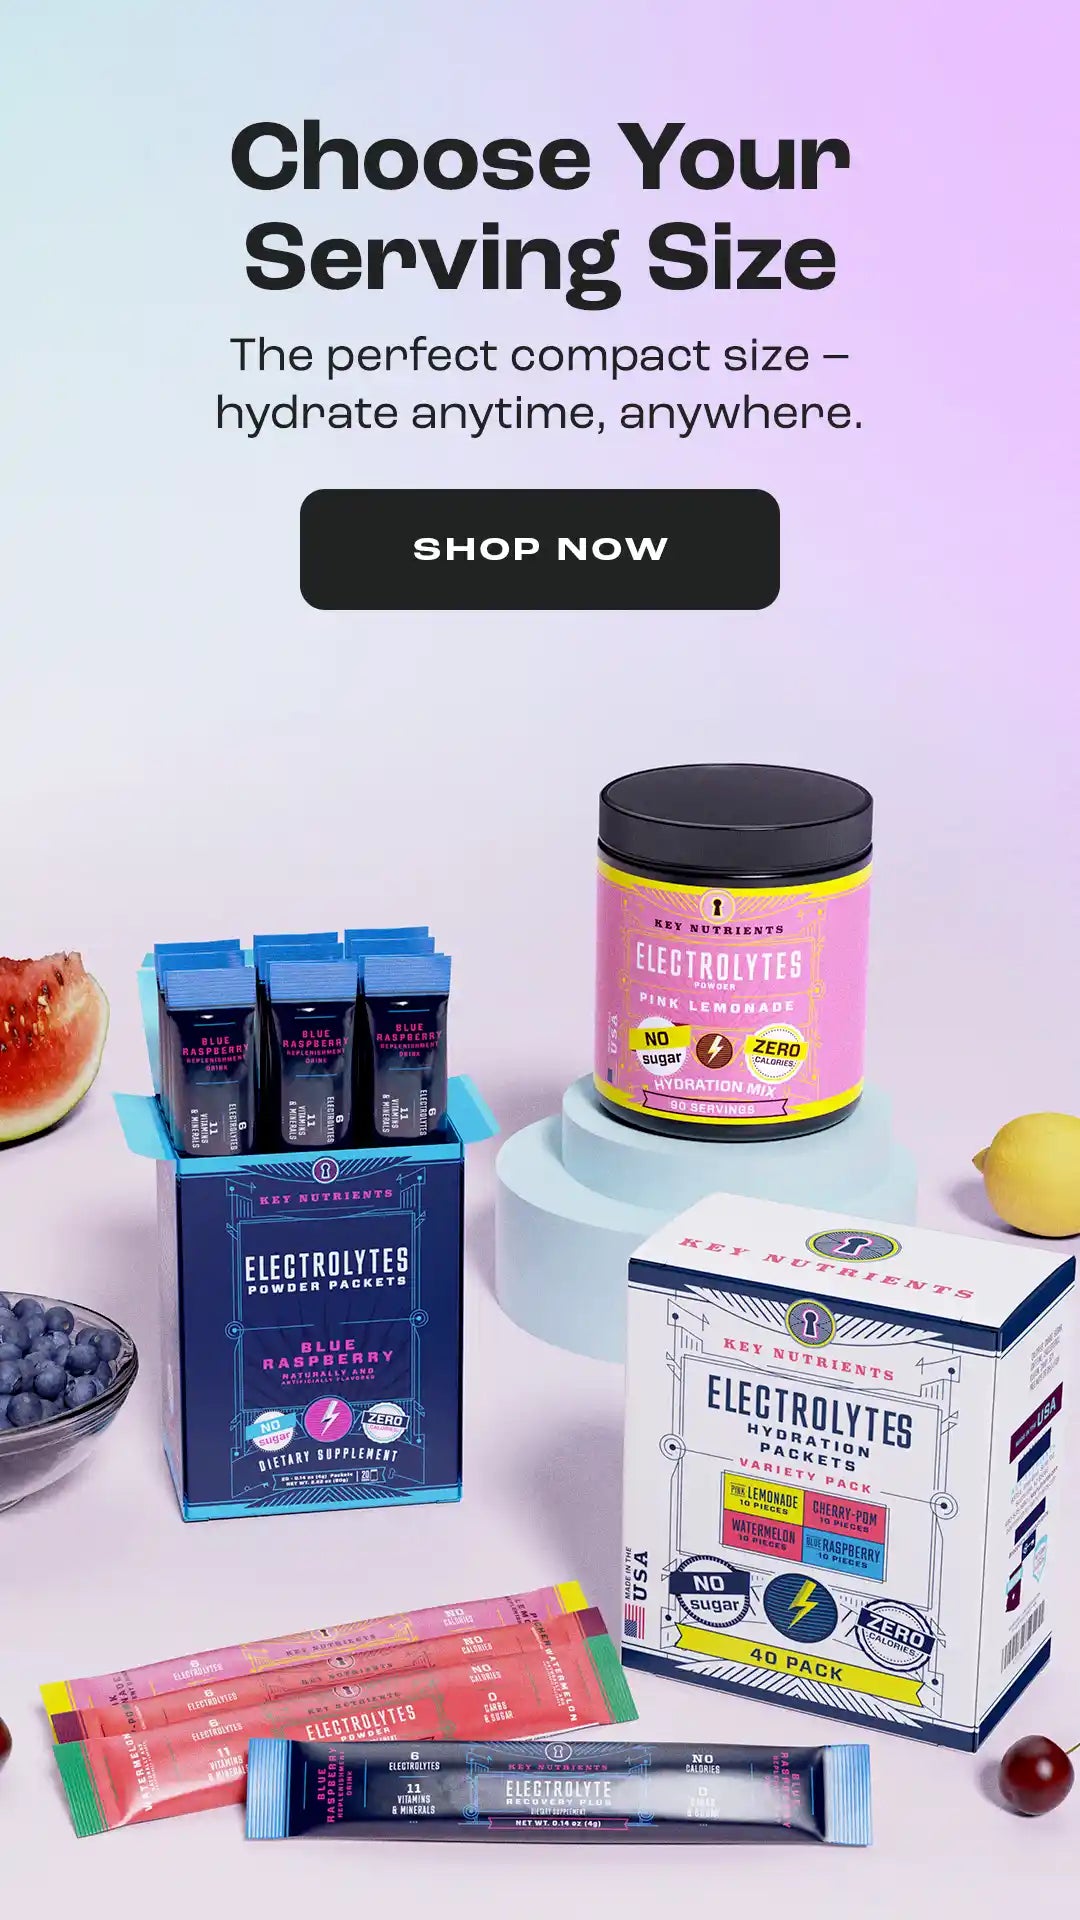 KN electrolyte products